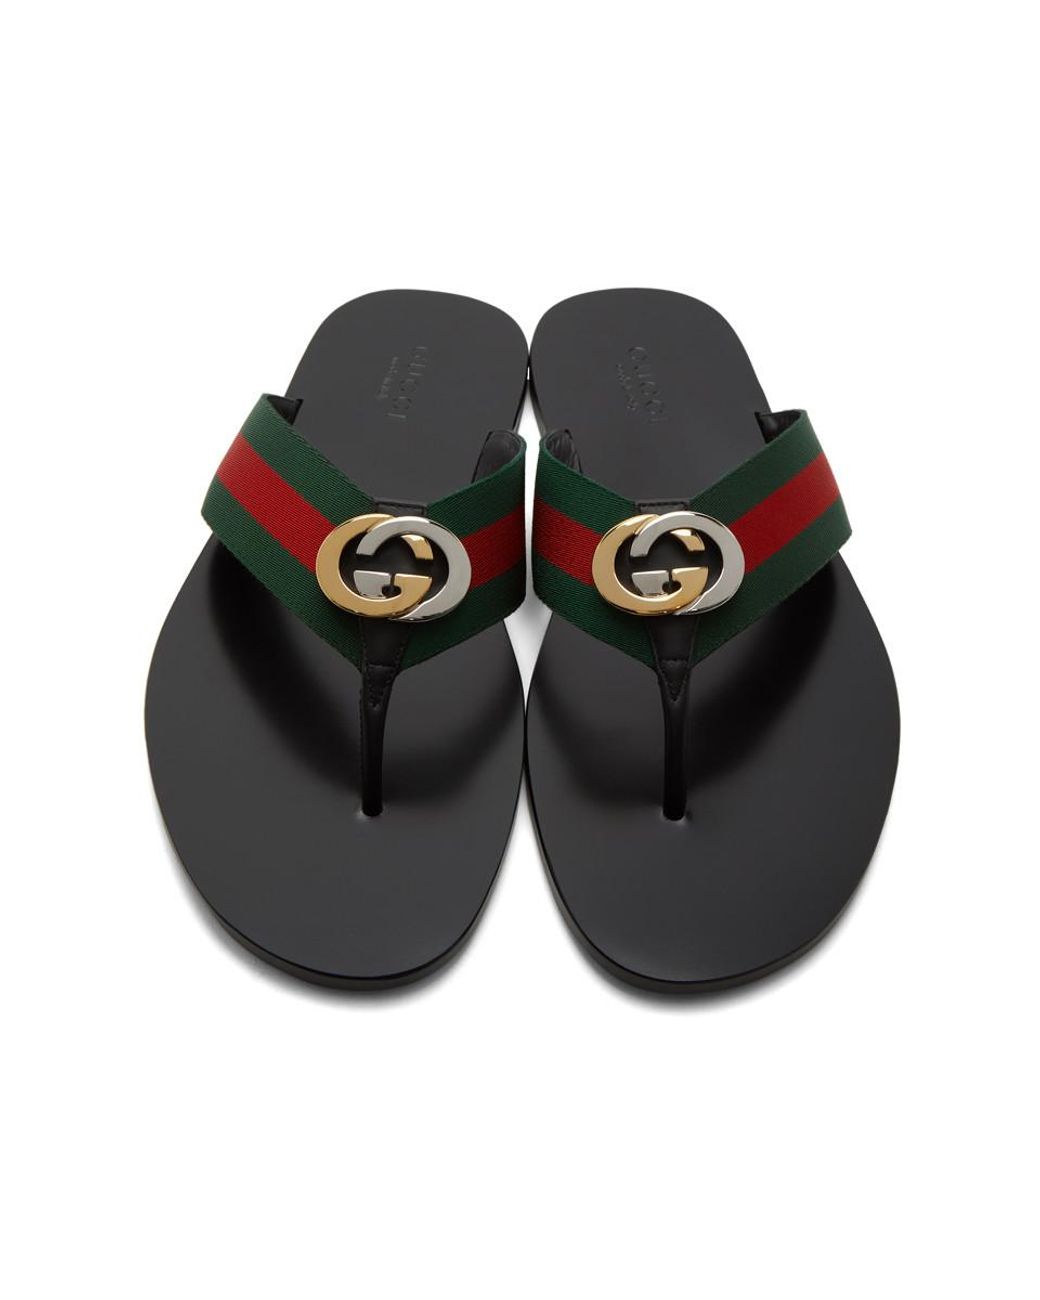 green and red gucci flip flops